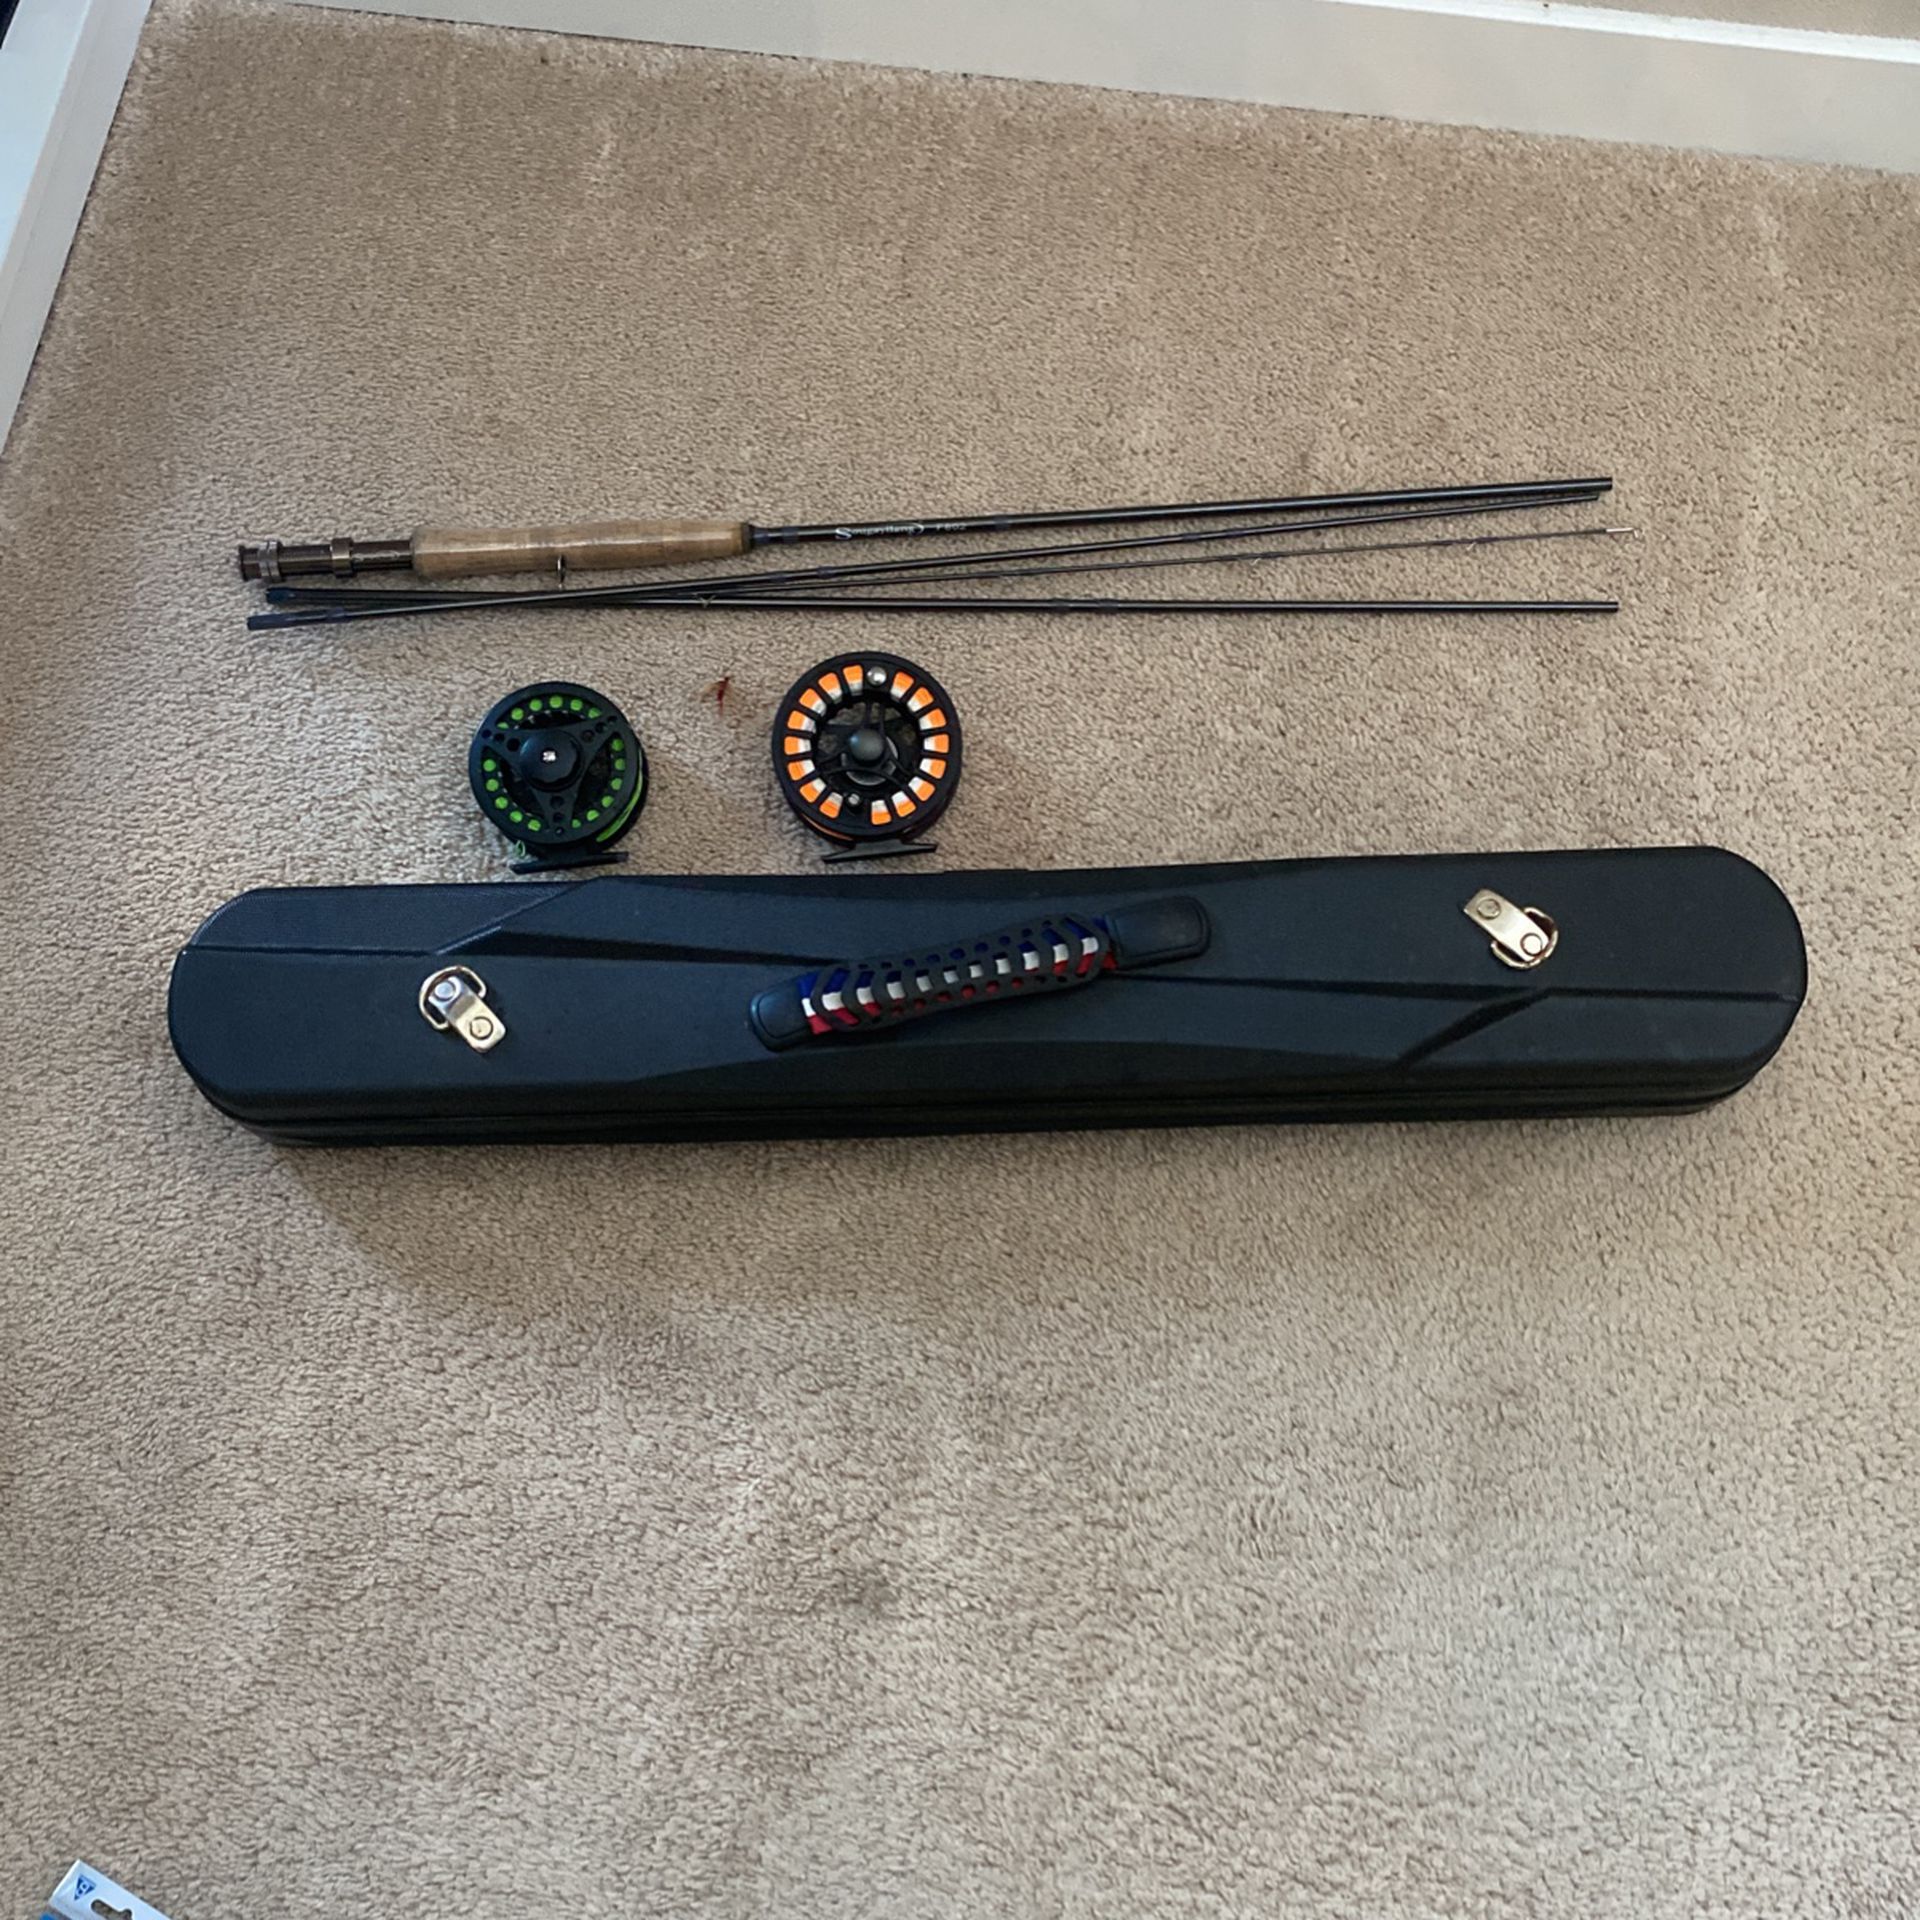 Fly Fishing Rod With 2 Reals And Case 